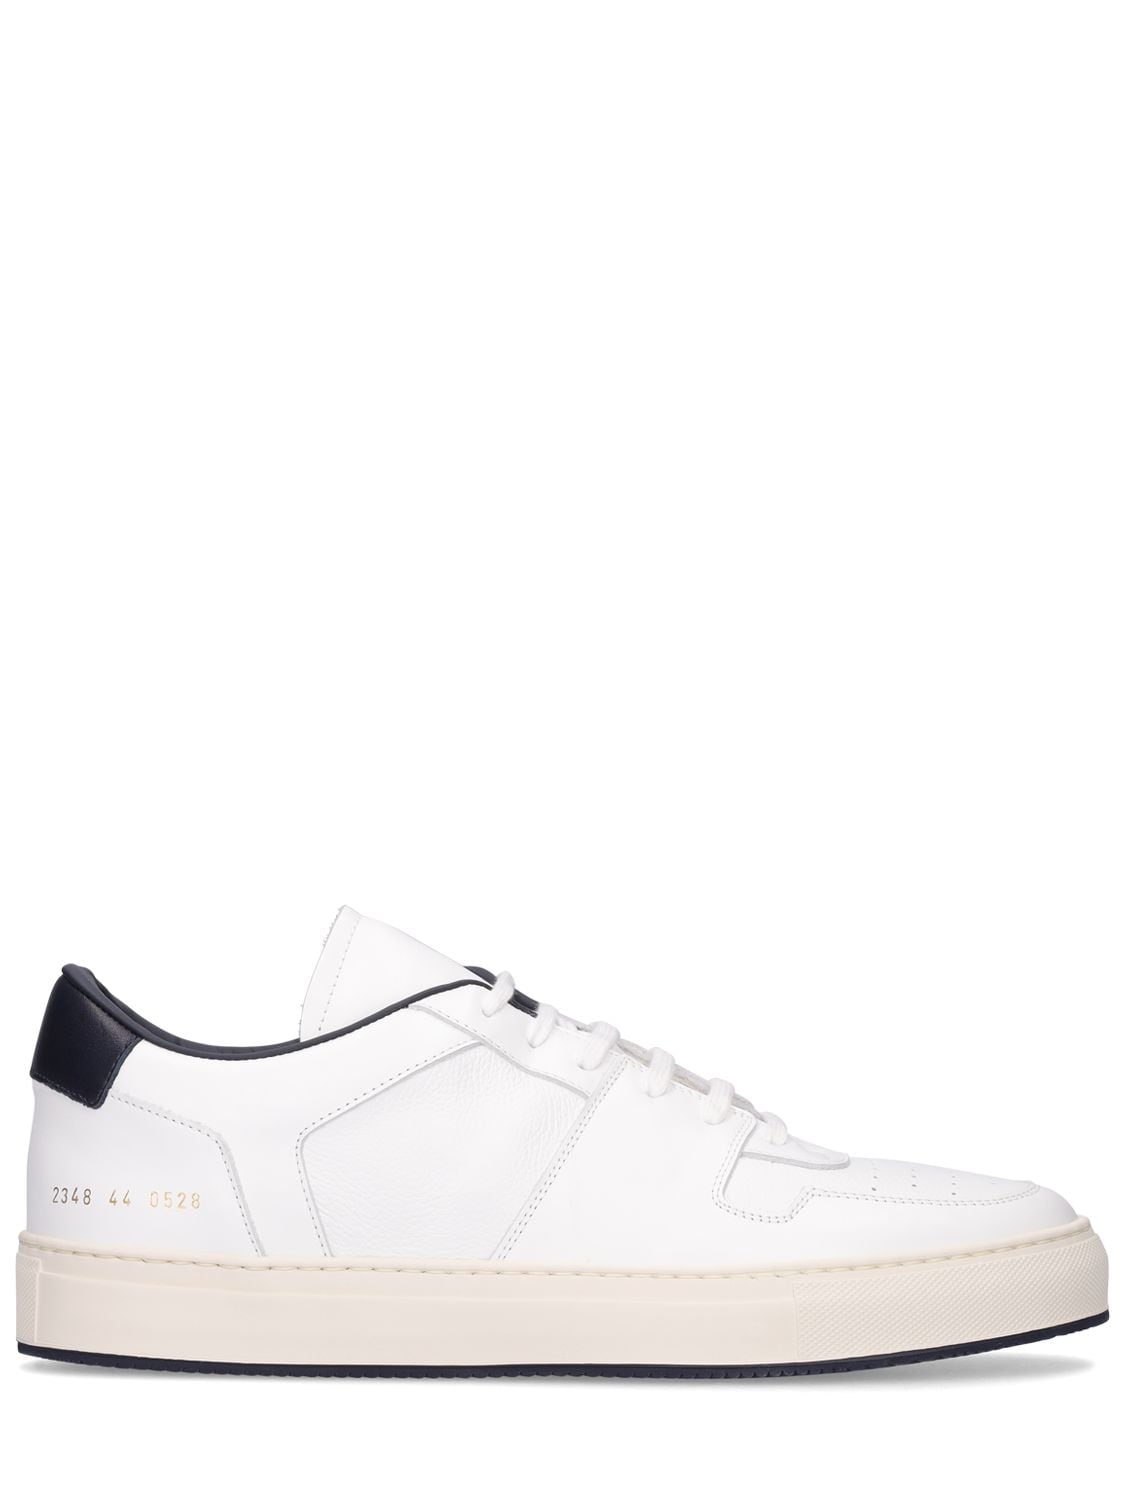 Sneakers Low Top Decades In Pelle - COMMON PROJECTS - Modalova